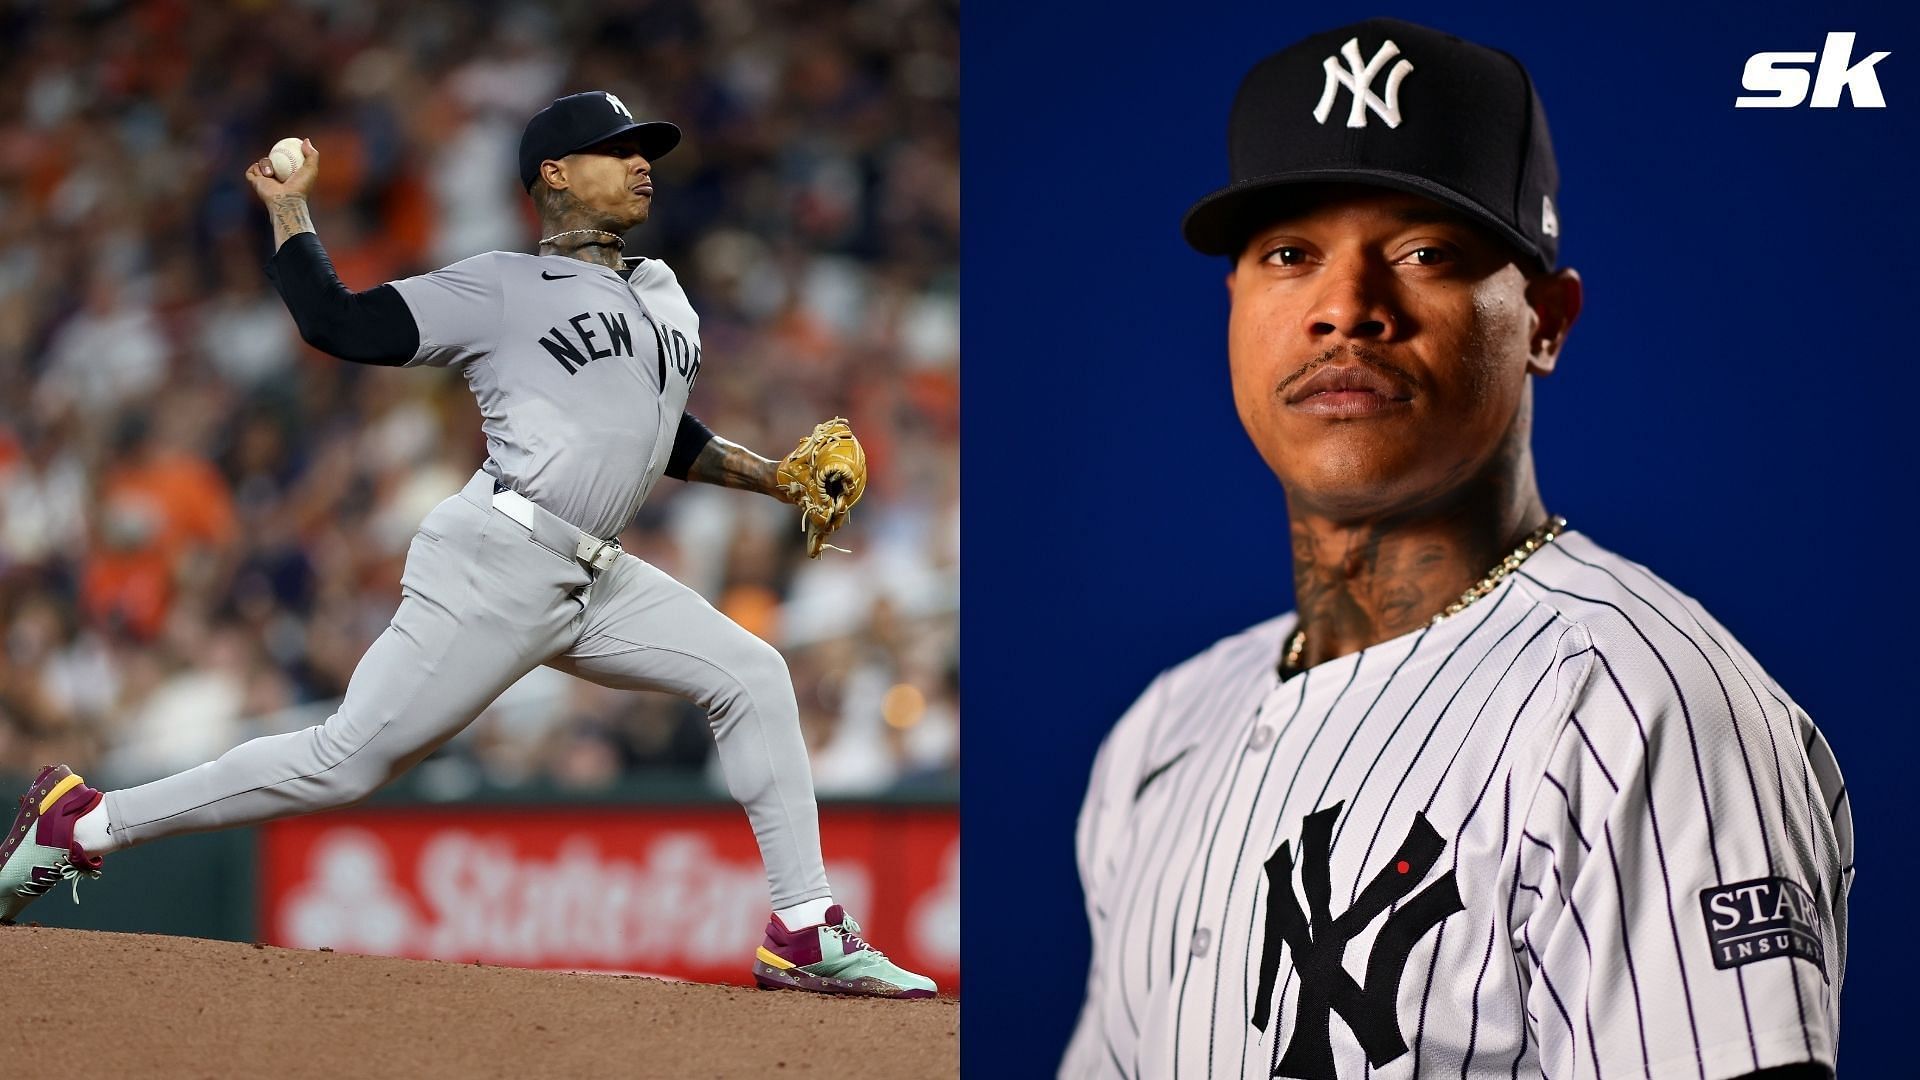 Marcus Stroman will take to the mound for the Yankees